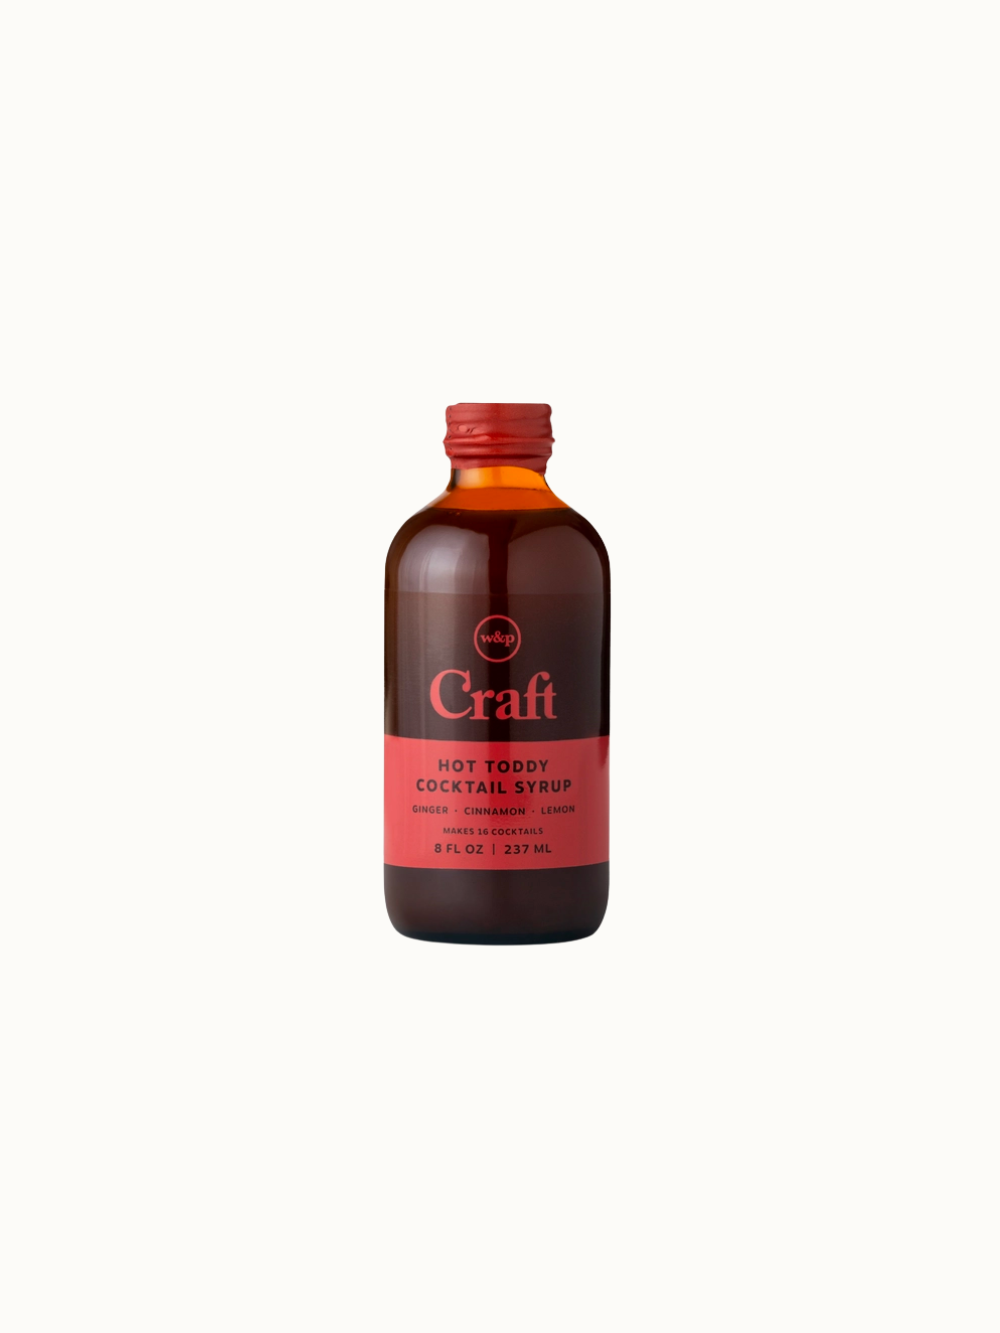 The Hot Toddy includes Hot Toddy cocktail syrup by Craft. 